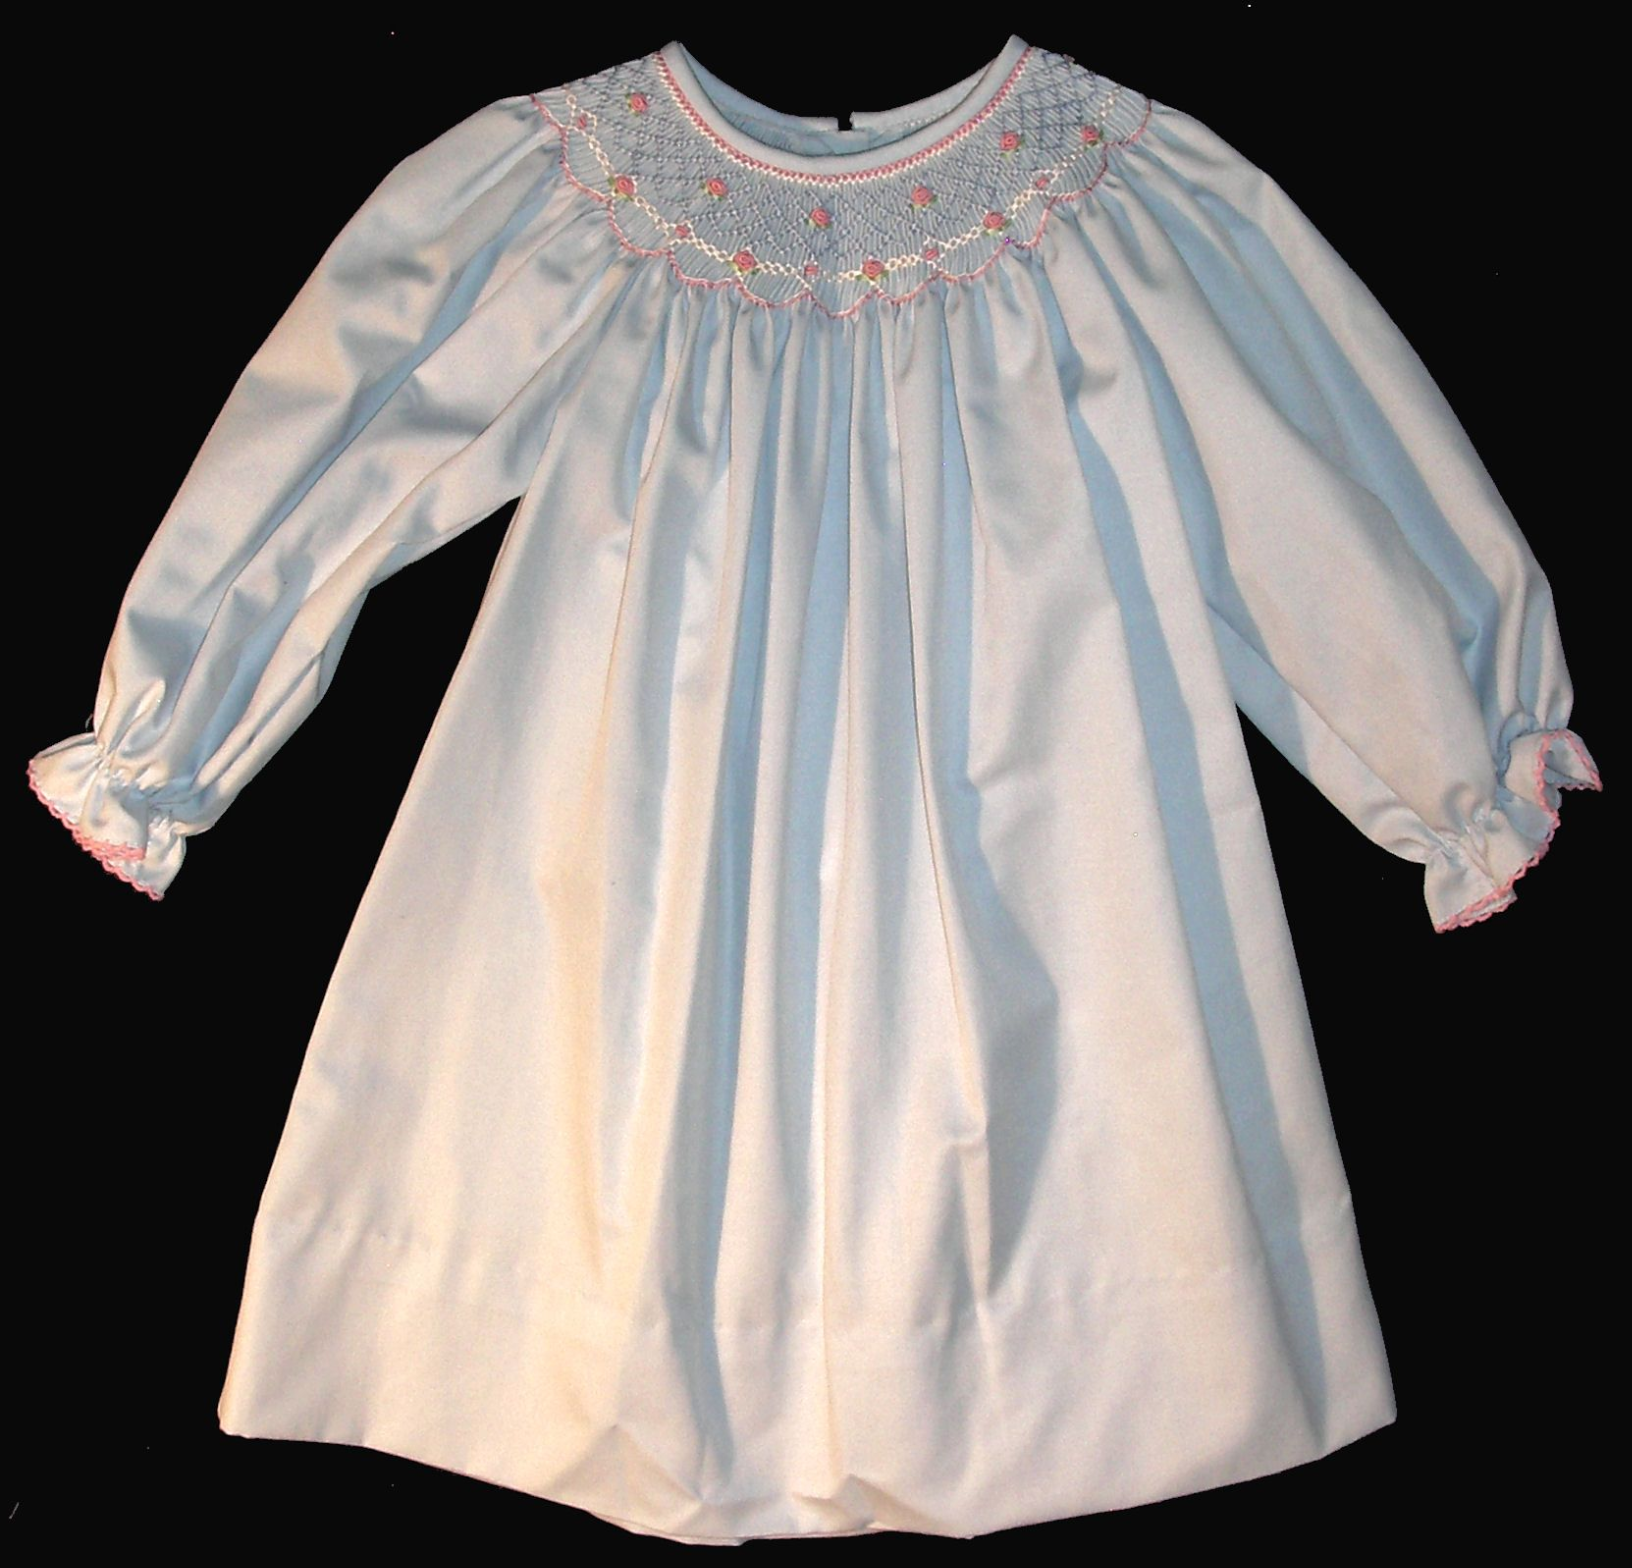 Bishop Blue Hand smocked dress - Eloise _ FREE Shipping Sz 12M to 8Y